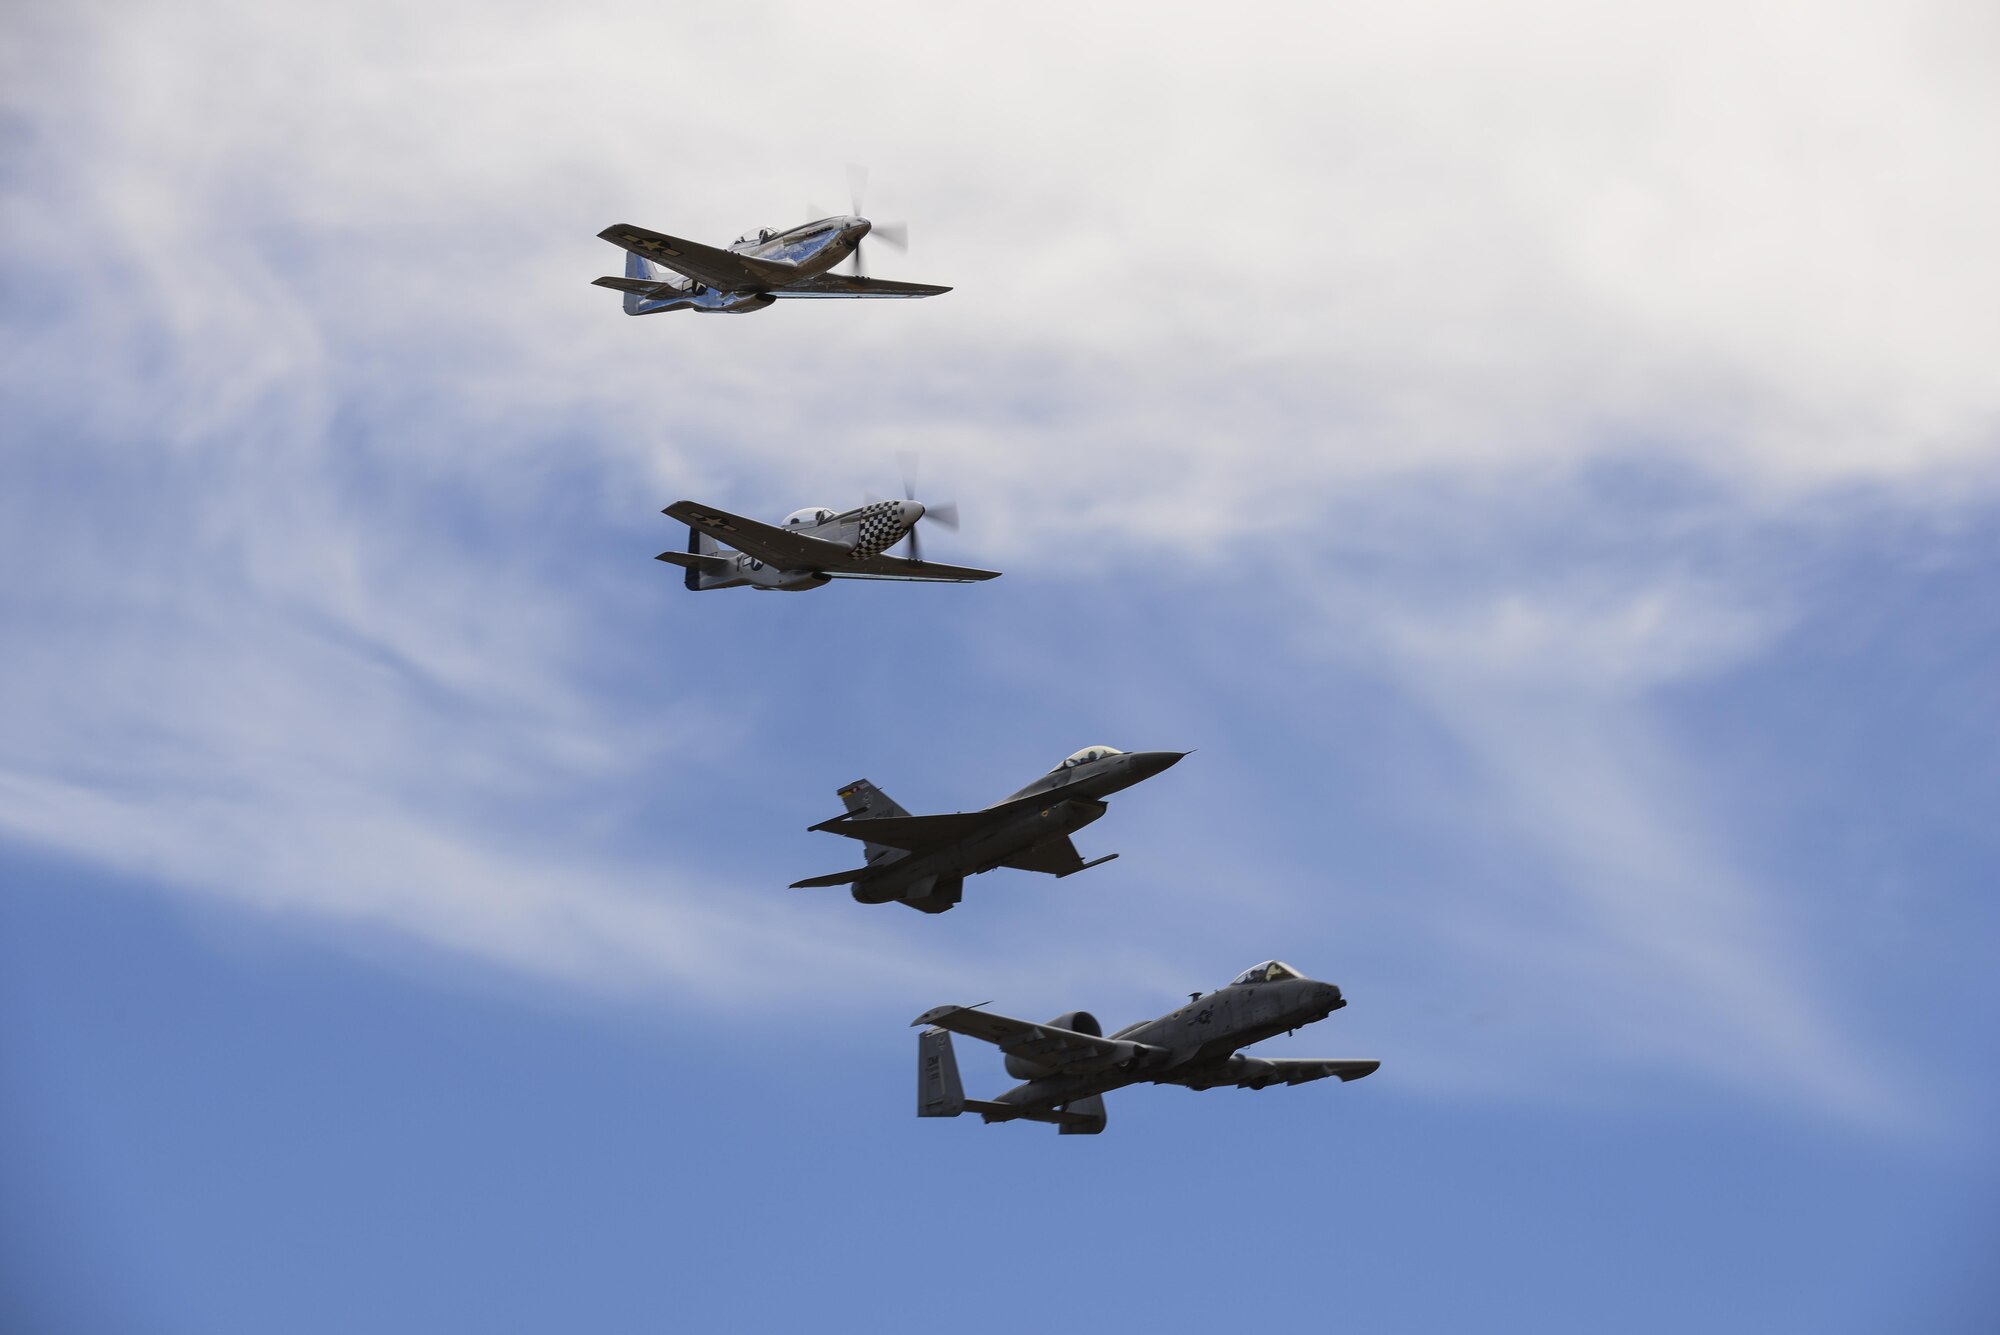 A U.S. Air Force A-10C Thunderbolt II, F-16 Fighting Falcon, TF-51  and  P-51 Mustang  fly in formation during the 2017 Heritage Flight Training and Certification Course at Davis-Monthan Air Force Base, Ariz., Feb. 11, 2017. During the course, aircrews practice ground and flight training to enable civilian pilots of historic military aircraft and U.S. Air Force pilots of current fighter aircraft to safely fly in formations together. (U.S. Air Force Photo by Airman 1st Class Nathan H. Barbour)